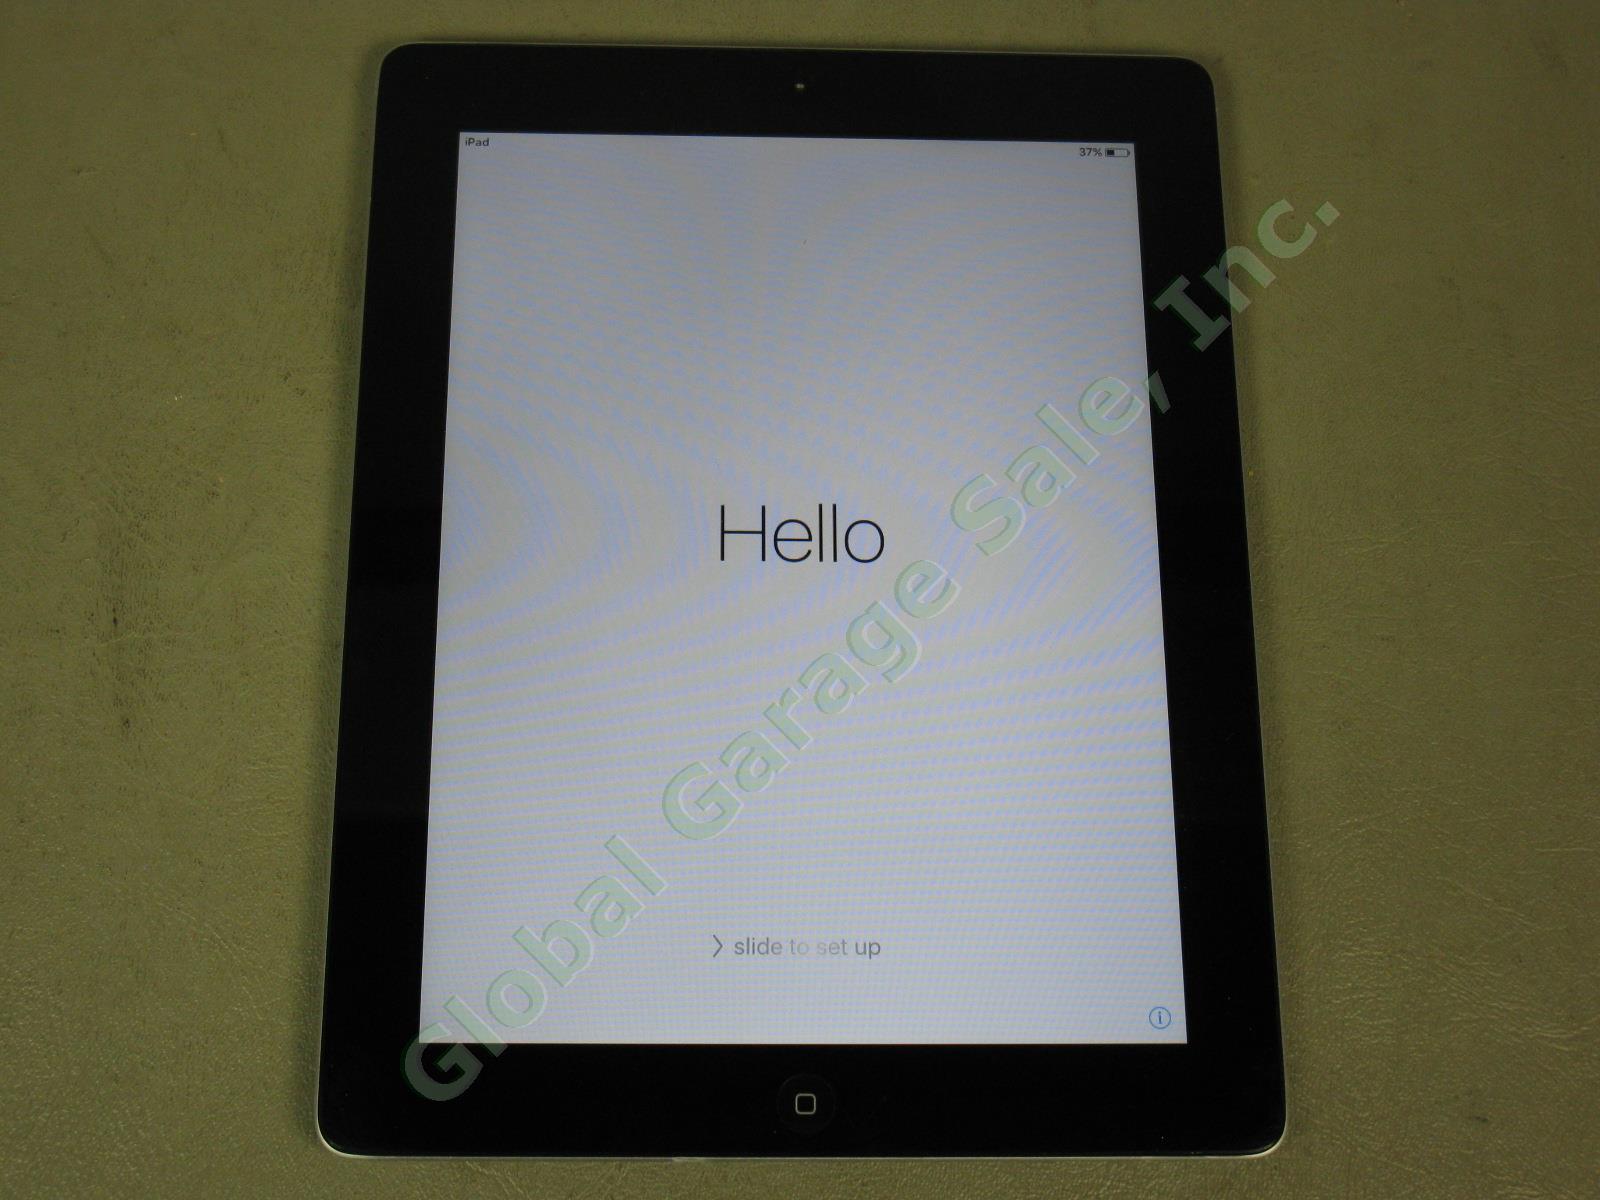 Apple iPad 2 Wifi 16GB Black Tablet Works Great MC770LL/A A1395 No Reserve Price